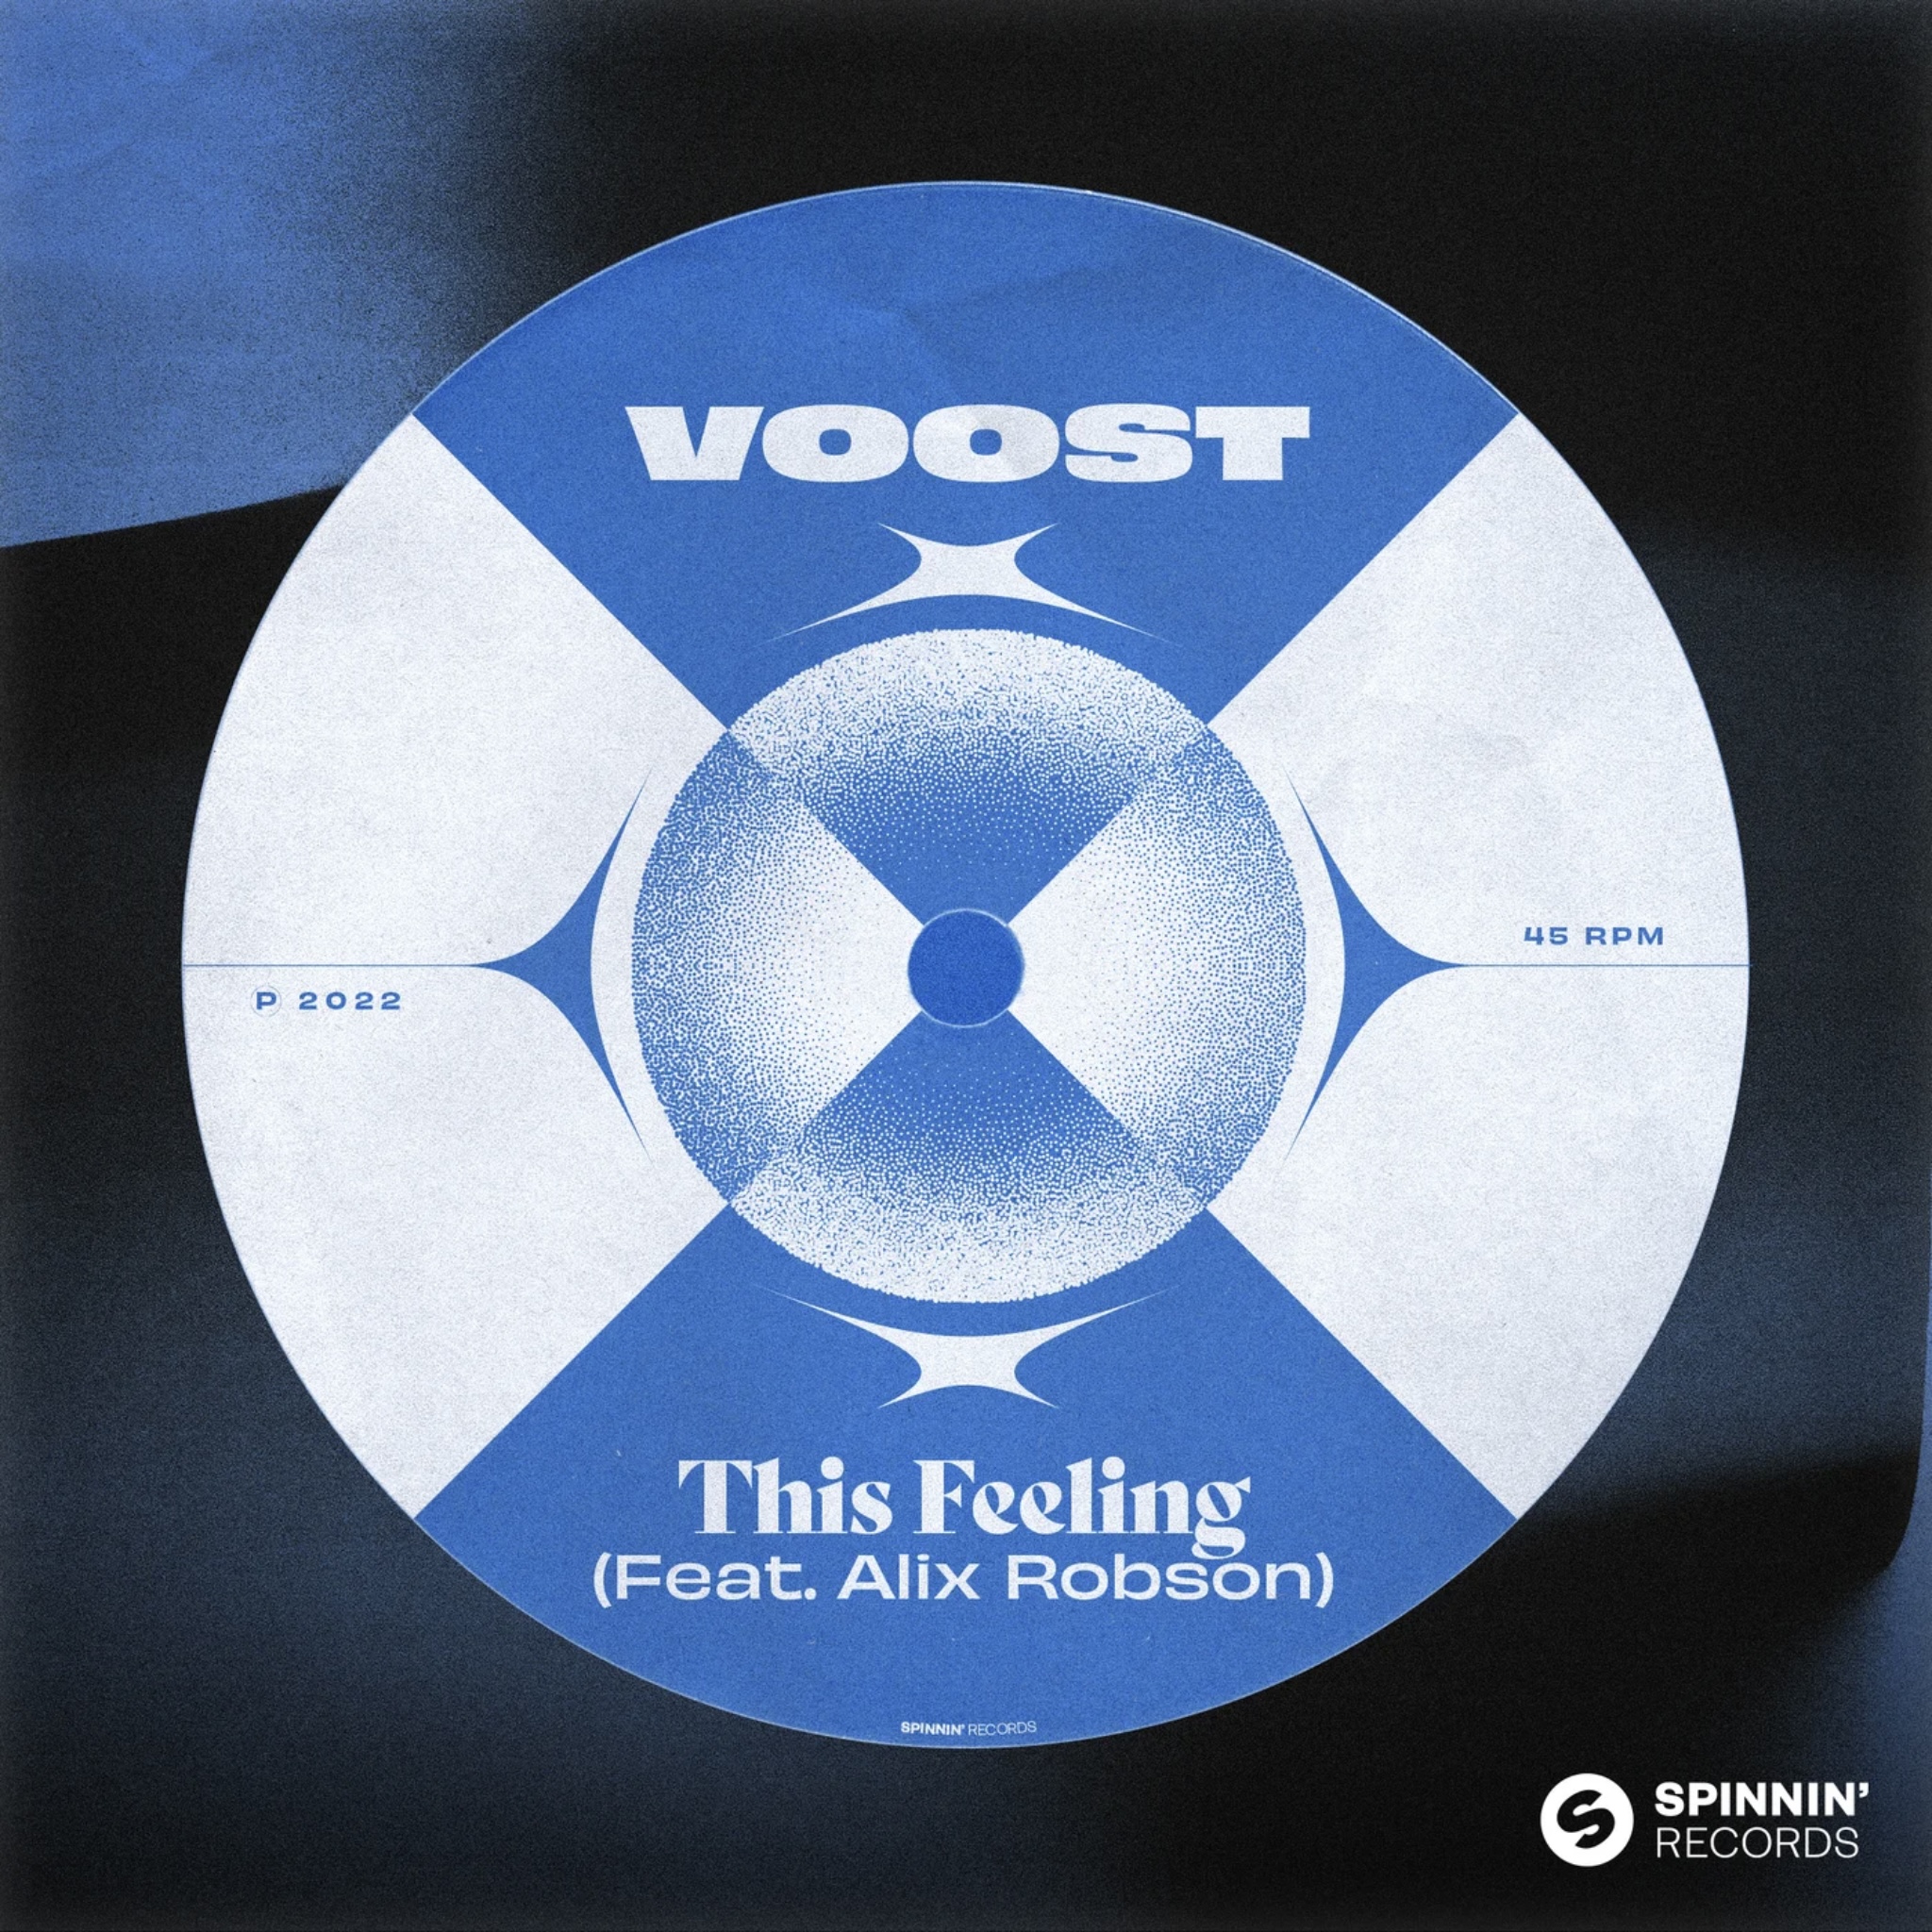 Voost ft. featuring Alix Robson This Feeling cover artwork